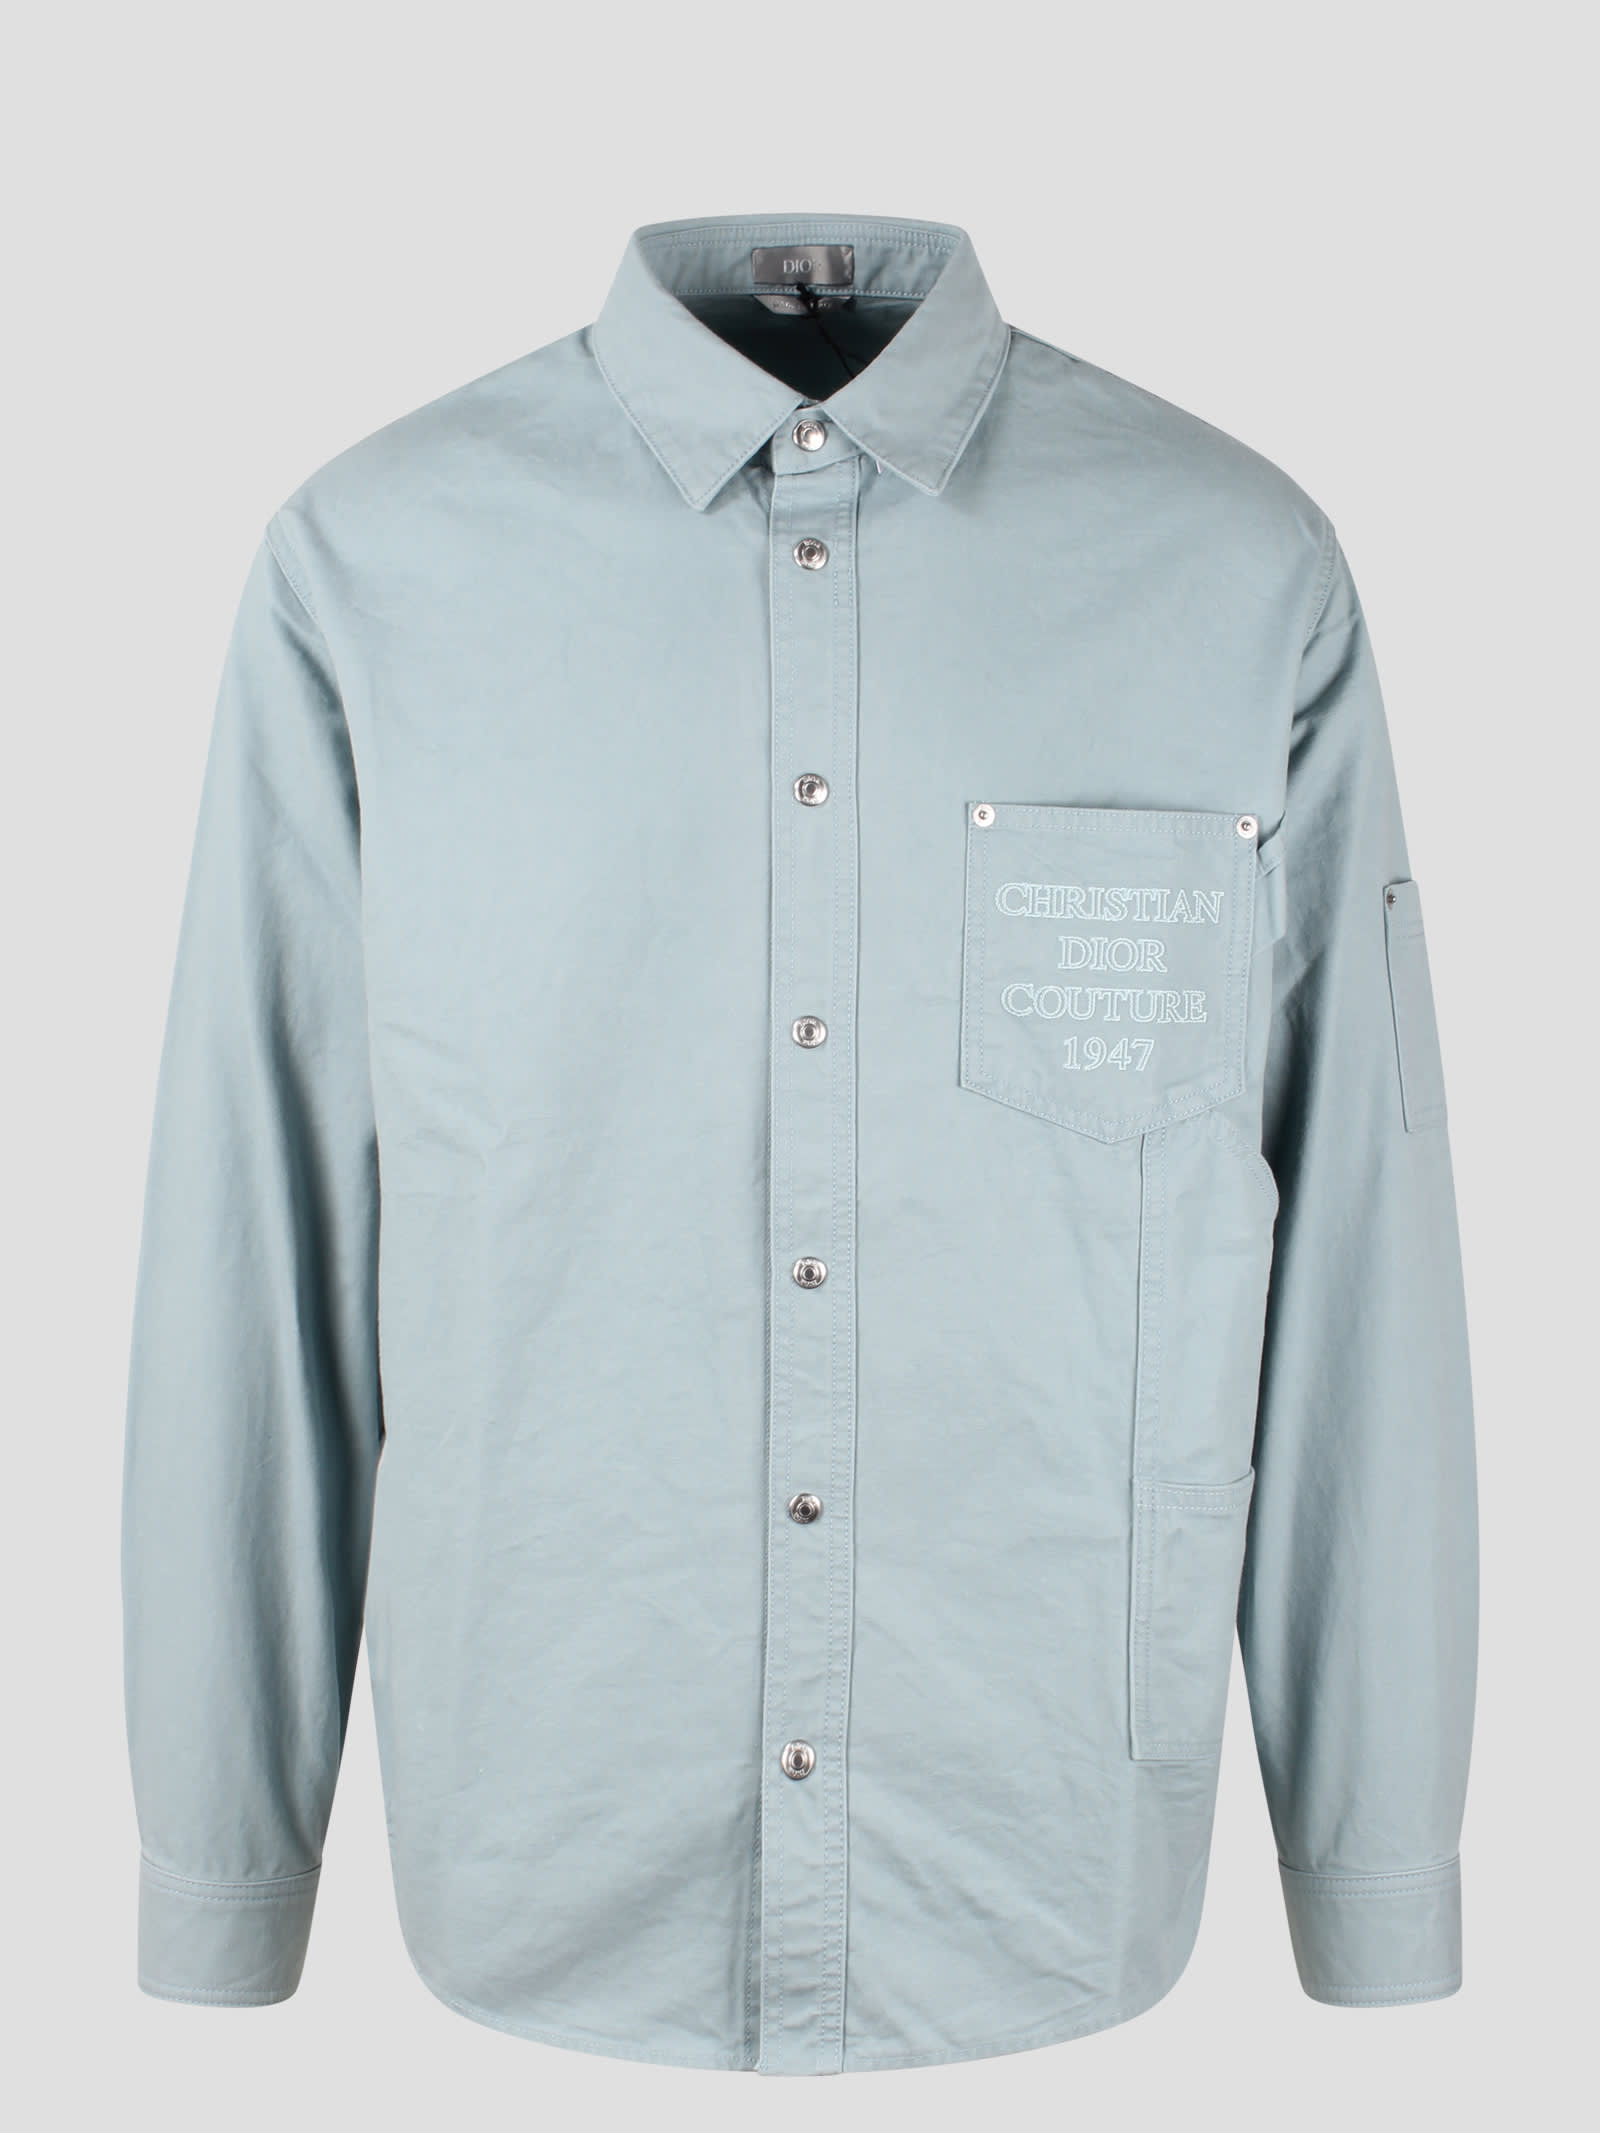 Christian Couture Overshirt